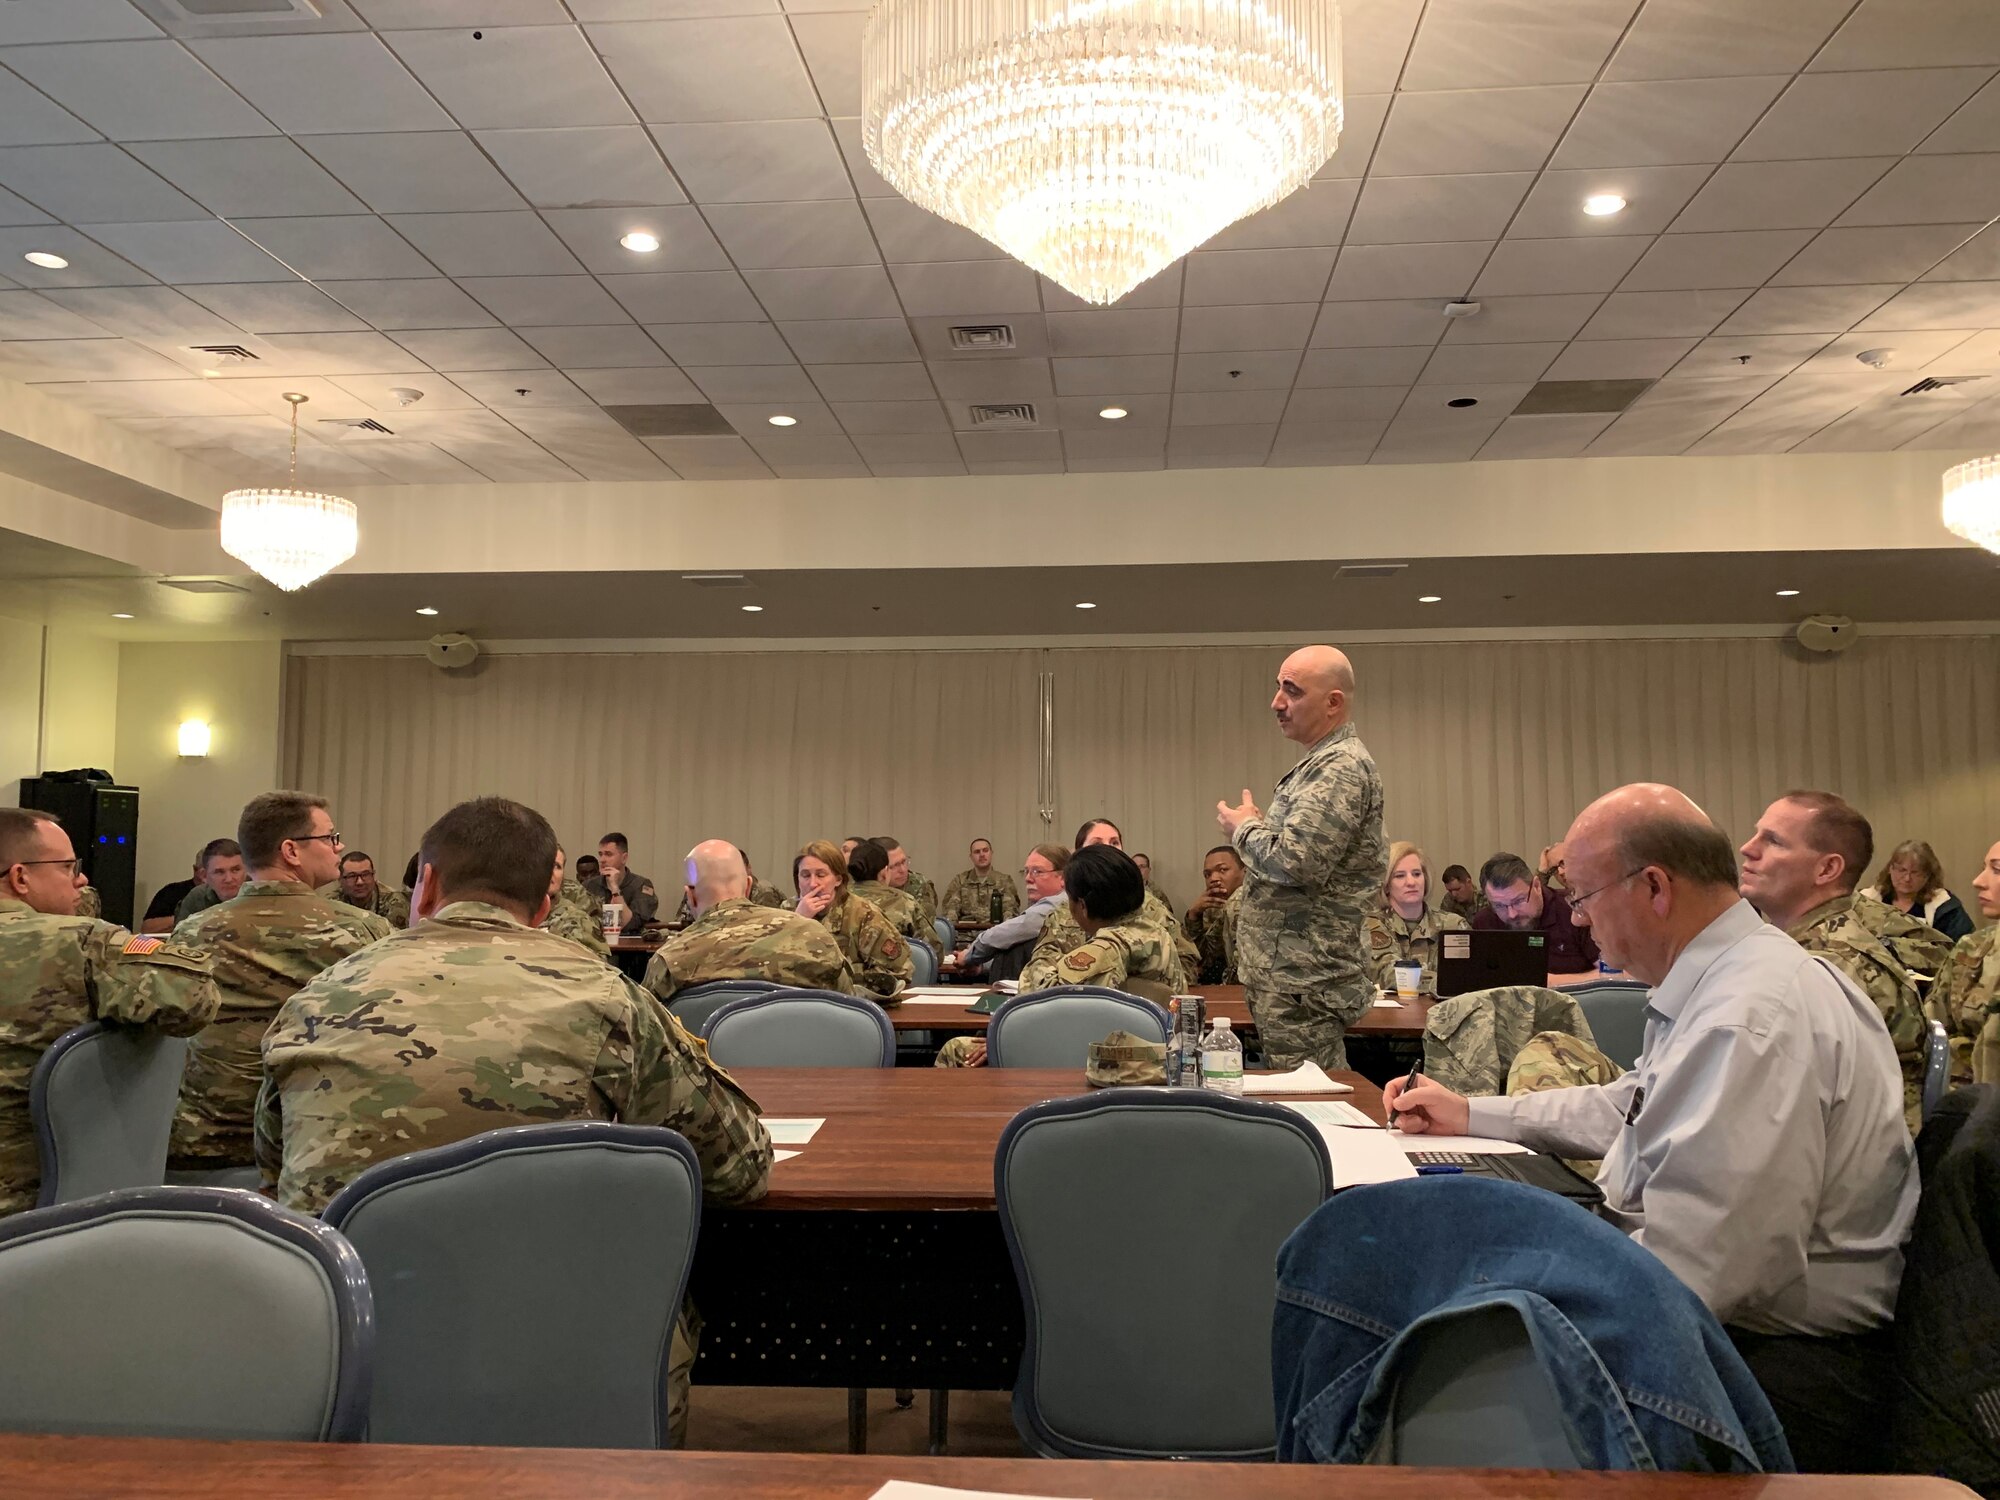 Participants work through scenario of the tabletop exercise, March 5 at the Trail's End Club on F.E. Warren Air Force Base, Wyo. Over 60 people came together from the base and community to dicuss possible medical scenarios. (U.S. Air Force photo by Capt. James Fisher)